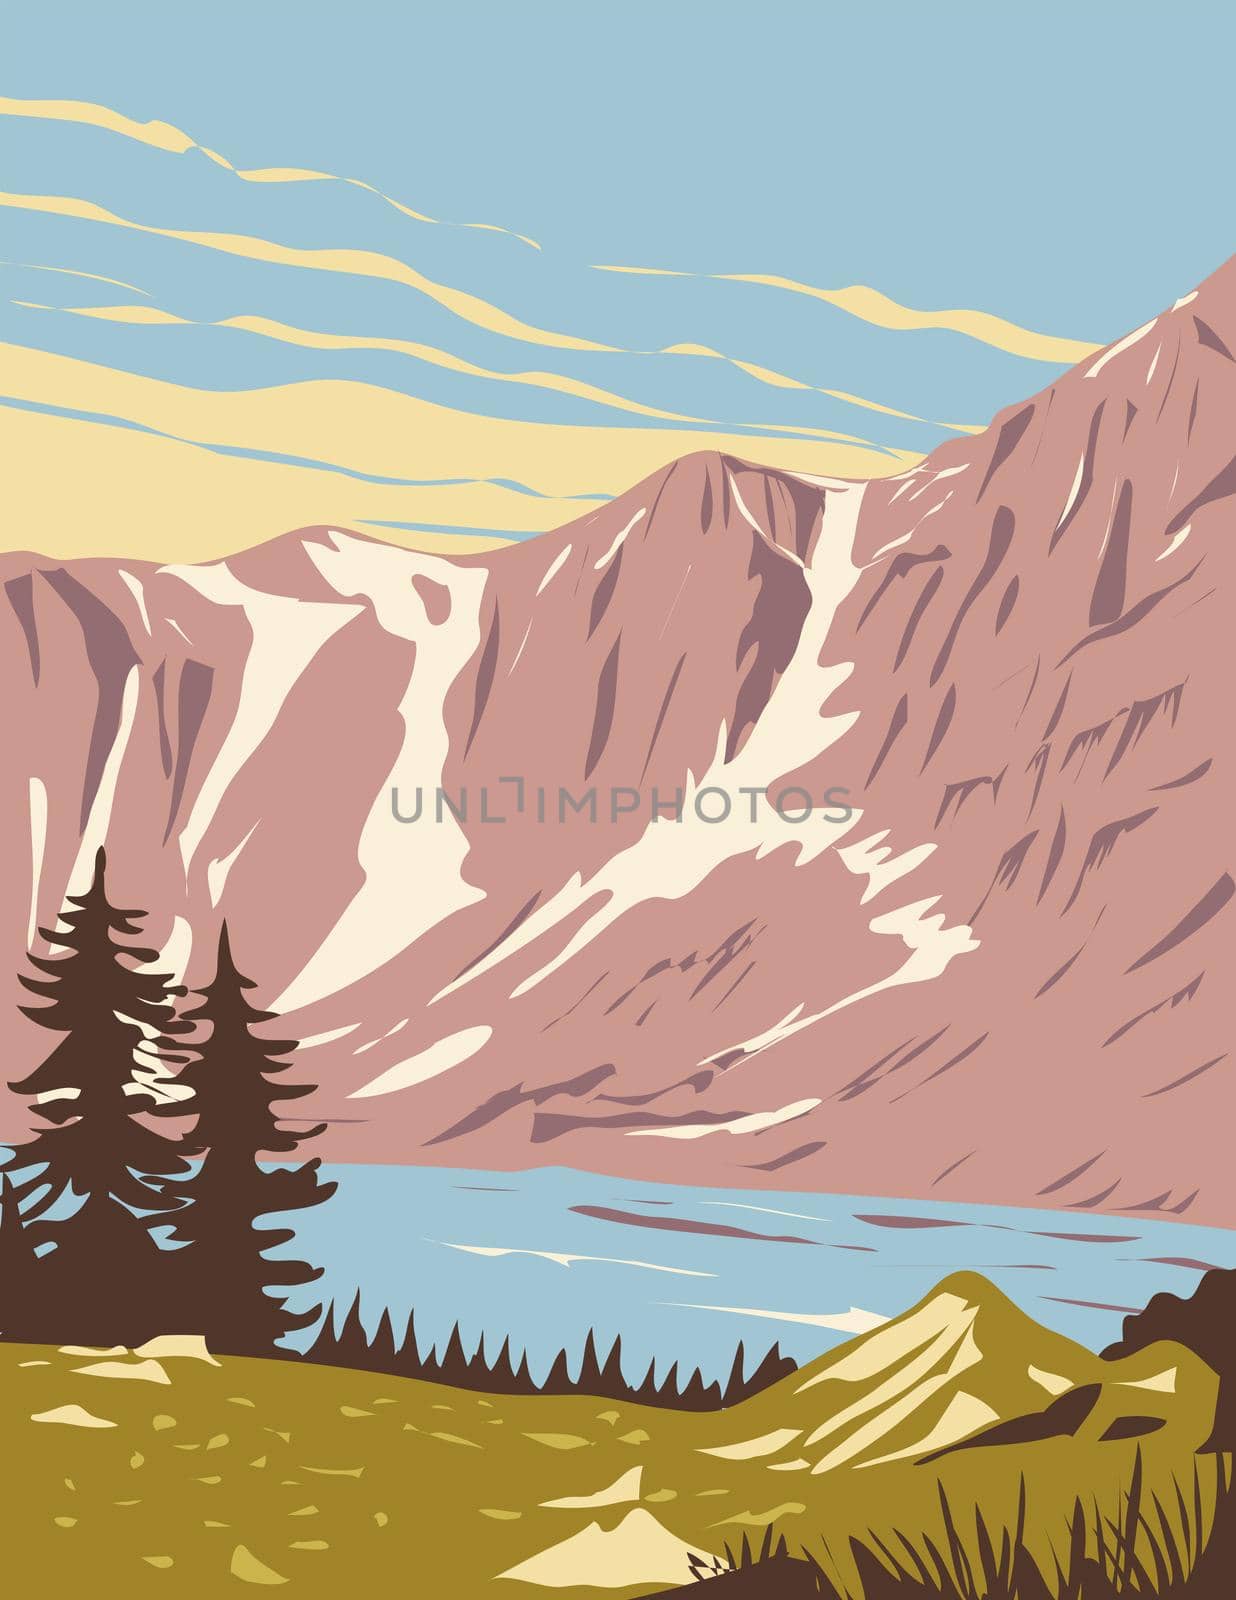 WPA poster art of Medicine Bow-Routt National Forest in the states of Wyoming and Colorado, United States USA done in works project administration style or federal art project style.